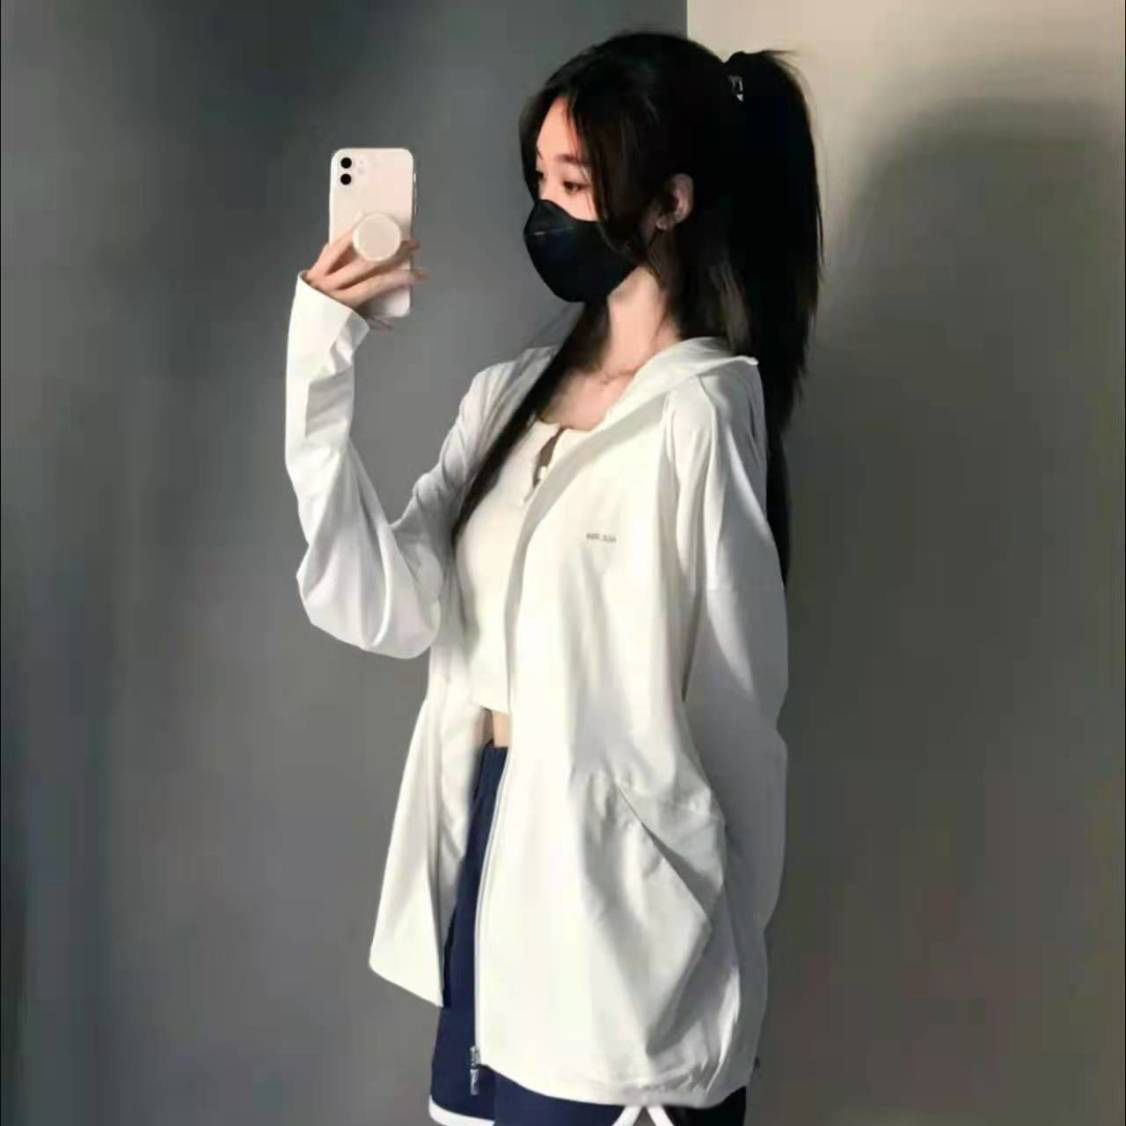 White sun protection clothing women's thin section ice silk long-sleeved t-shirt summer UV protection cardigan hooded jacket jacket tide